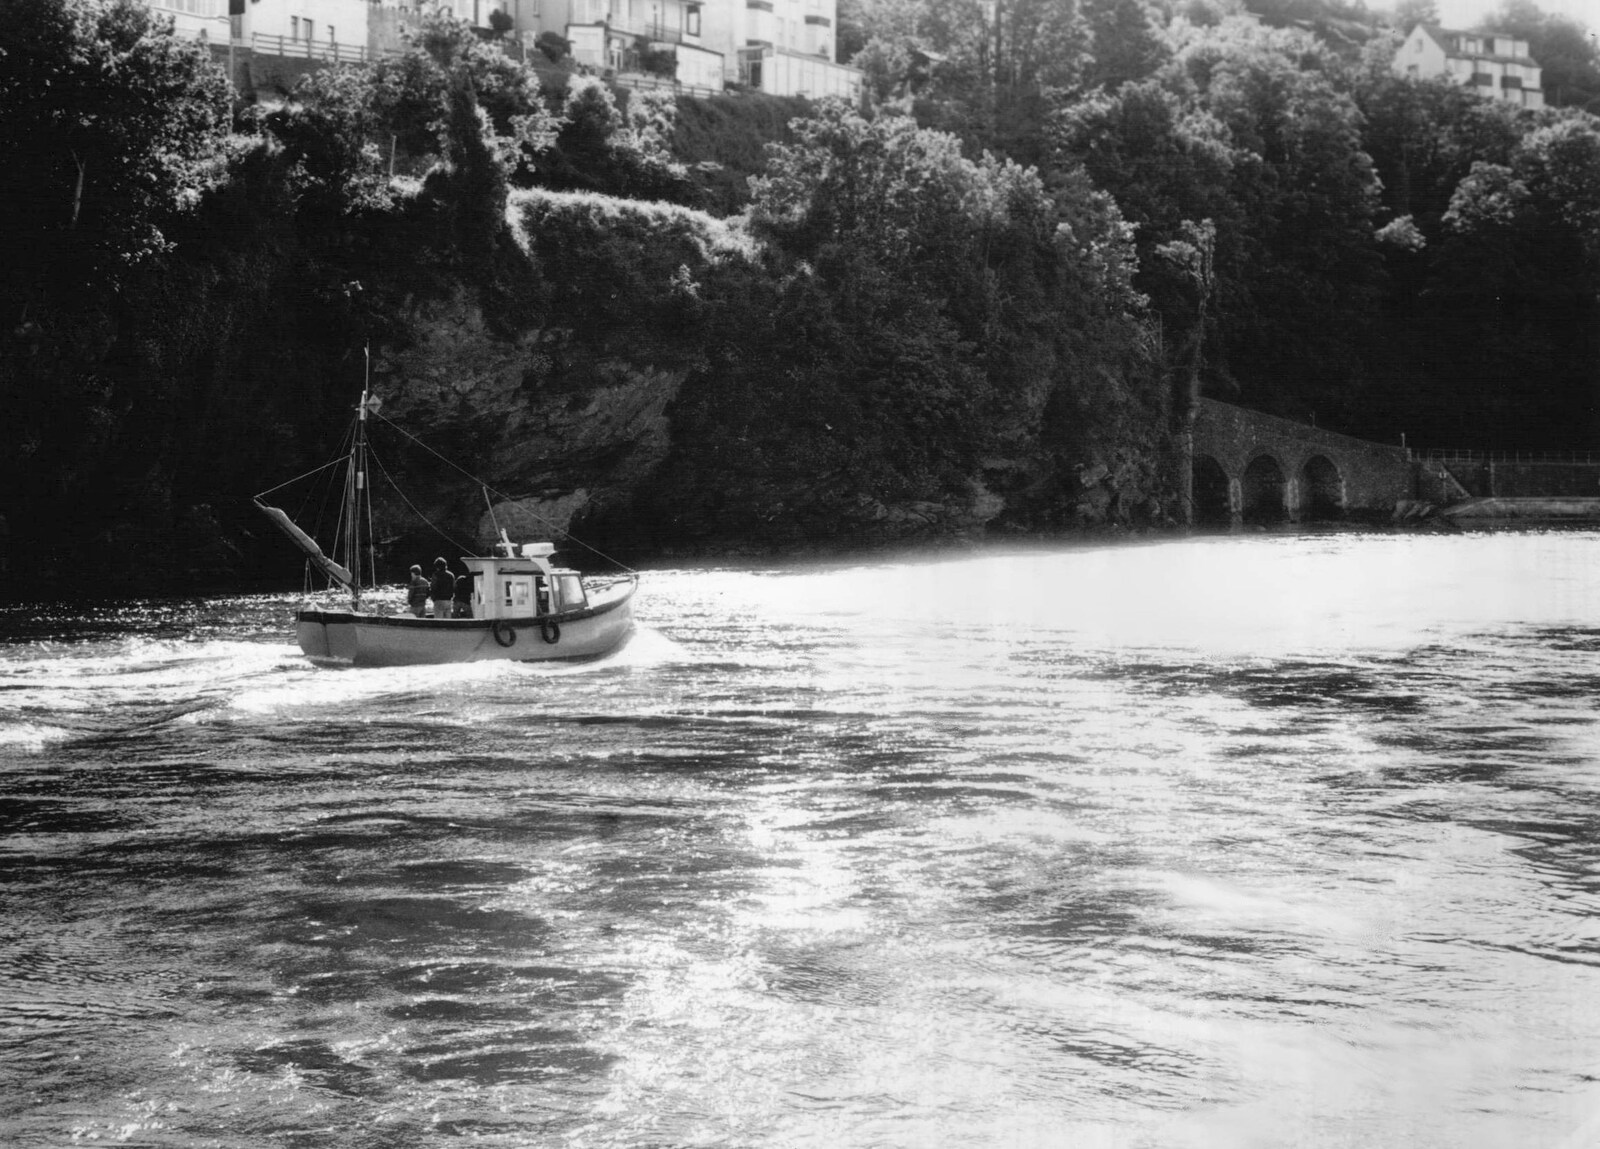 A fisihing boat on the river at Polperro from Uni: The Last Day of Term, Plymouth Polytechnic, Devon - 2nd June 1987